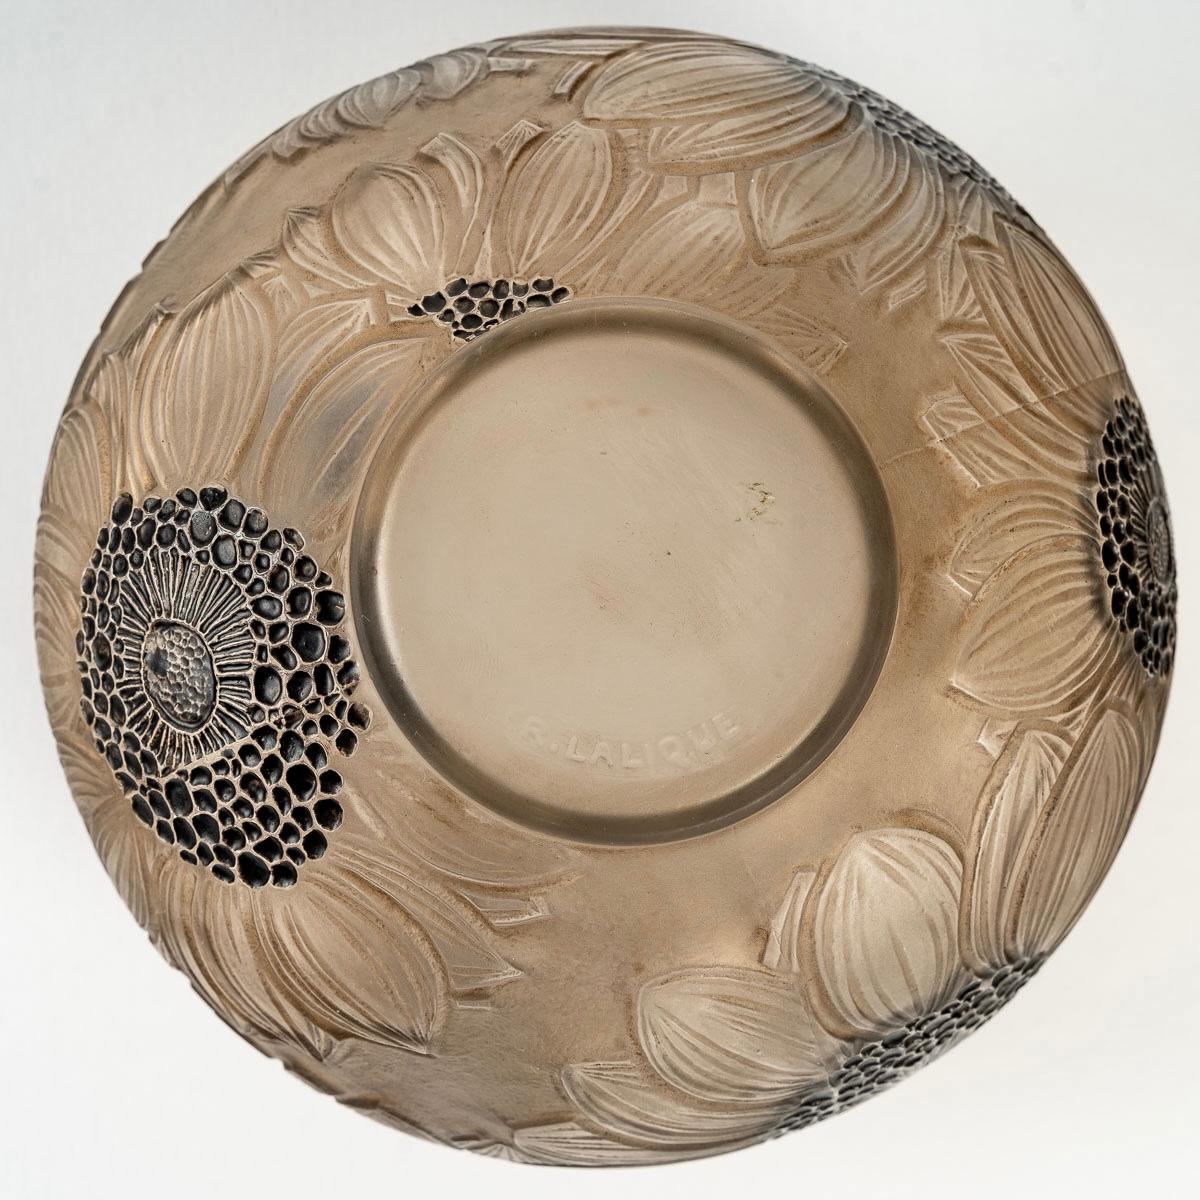 Molded 1923 René Lalique Vase Dahlias Frosted Glass with Sepia Patina and Black Enamel